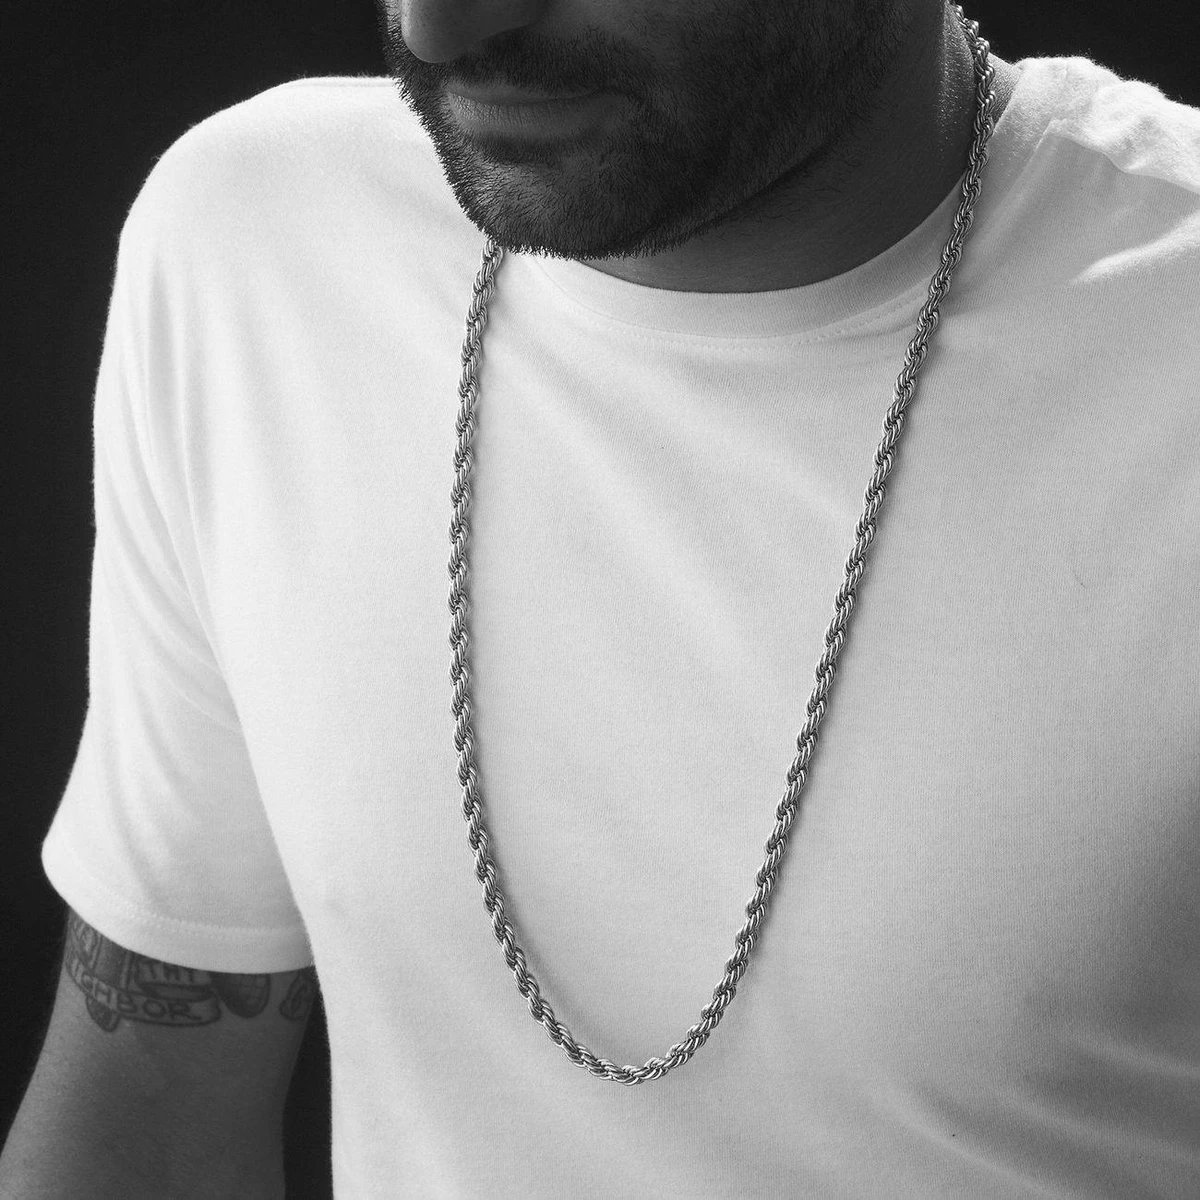 Rounded Rofe Chain Stainless Steel Necklace For Men